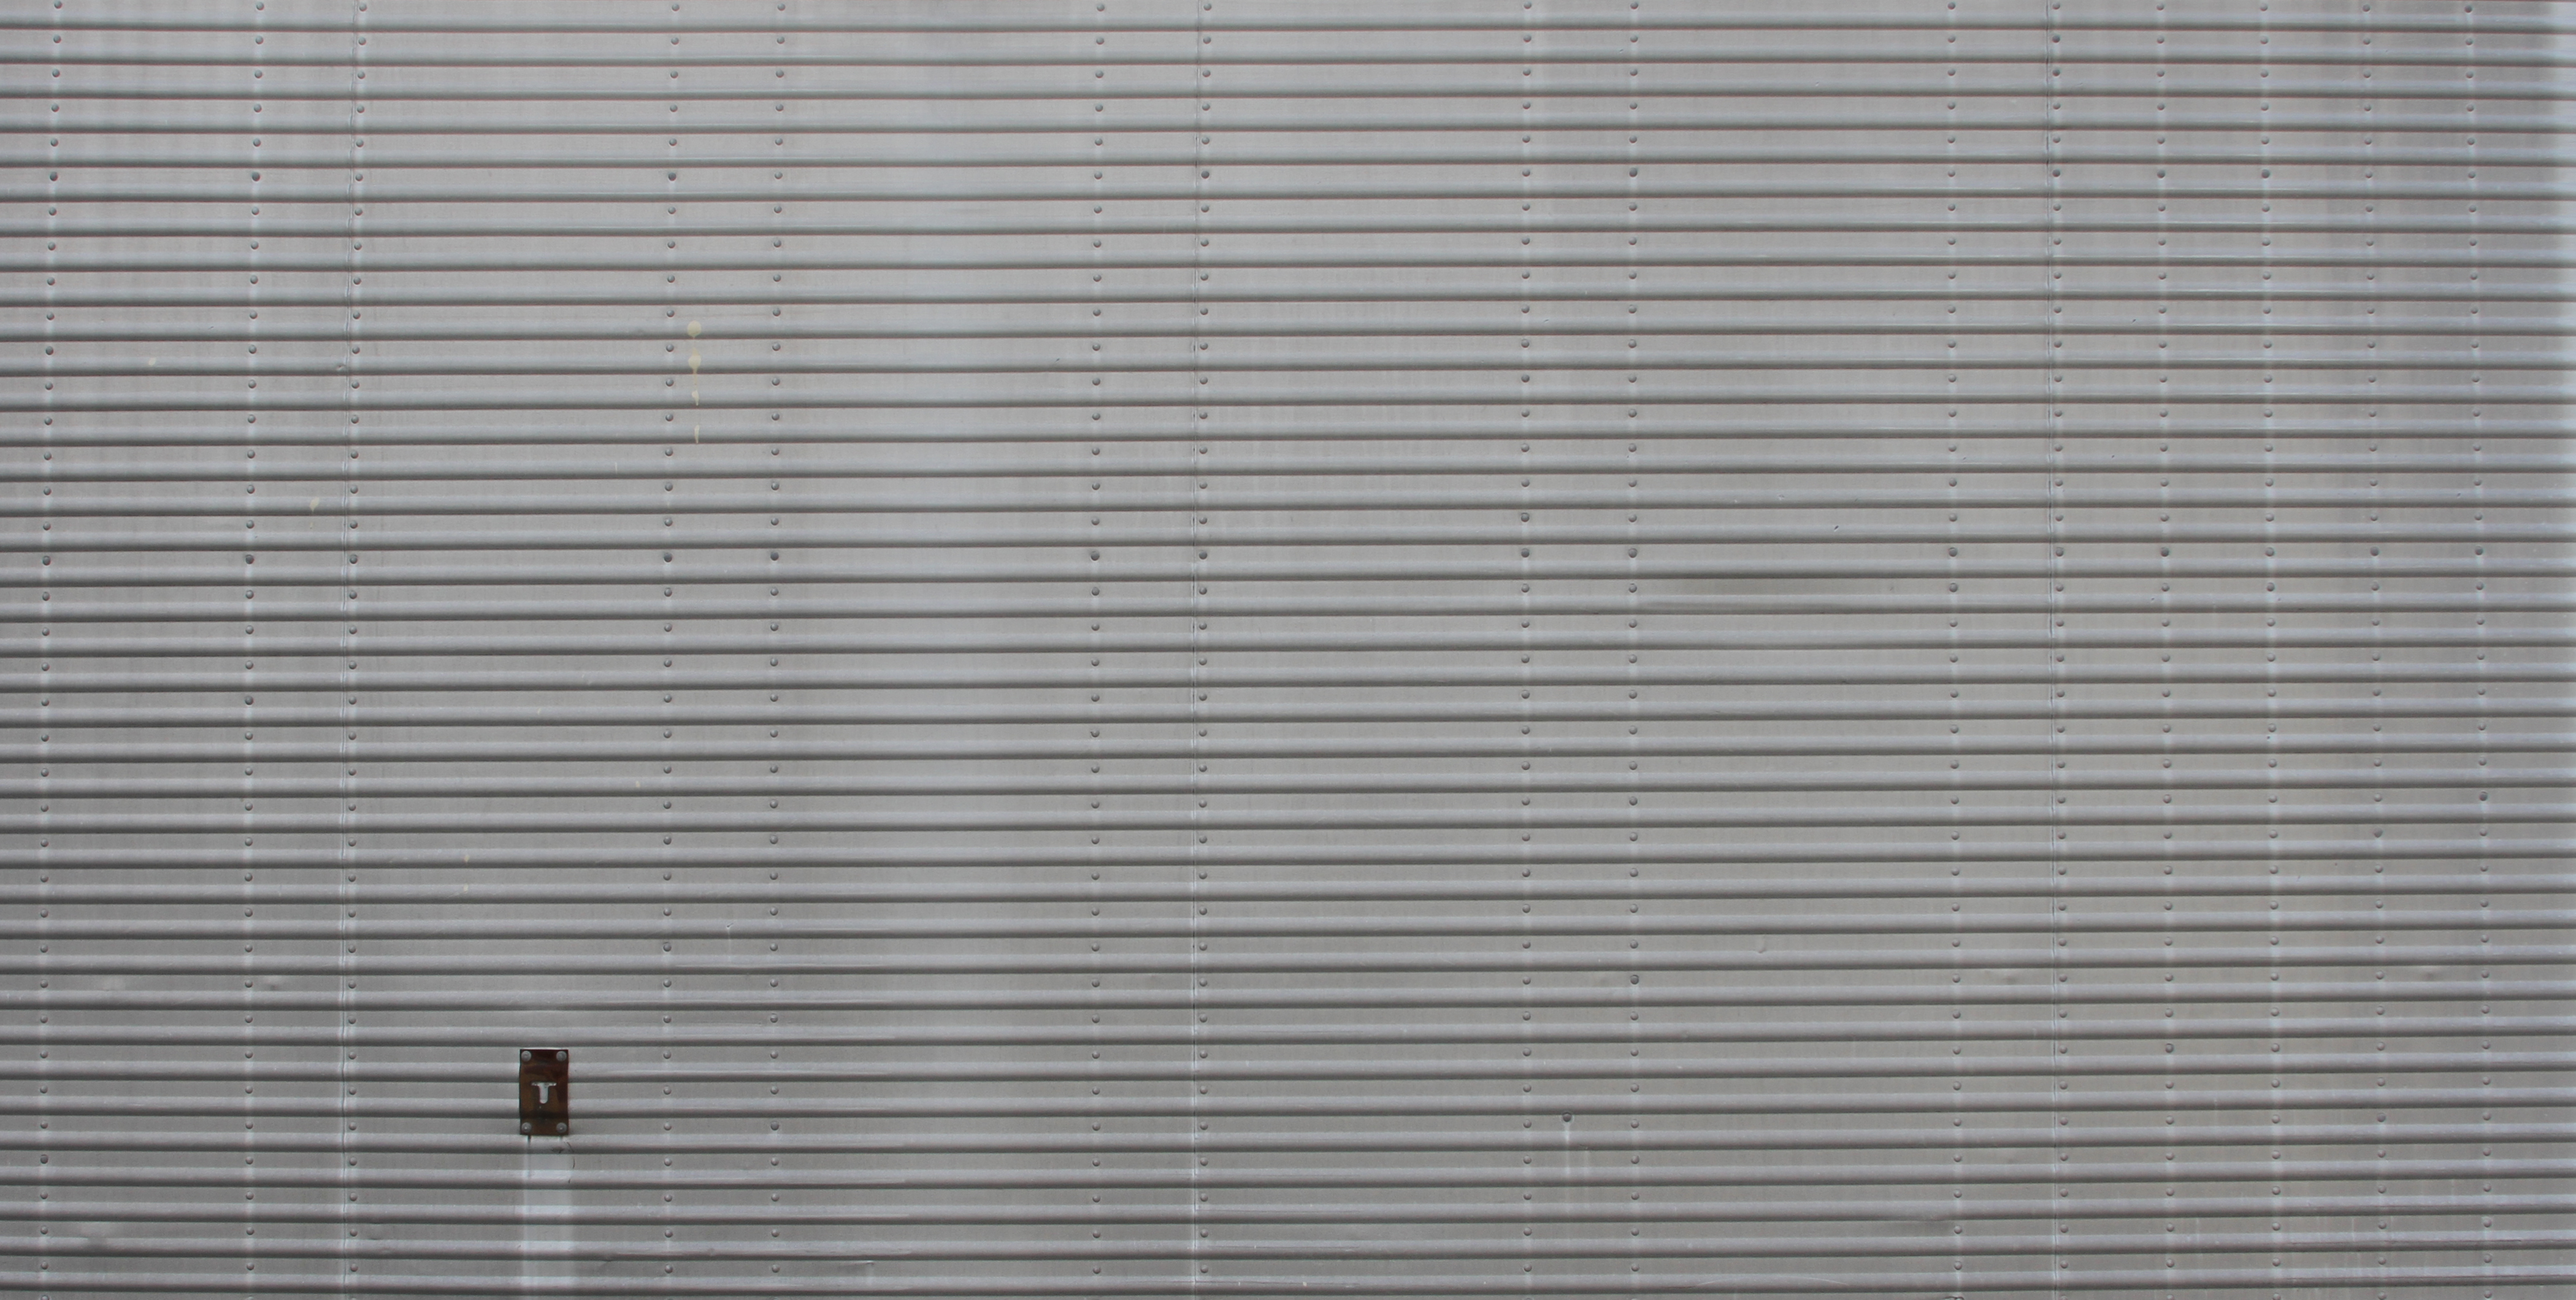 Thin Corrugated Metal Texture - 14Textures